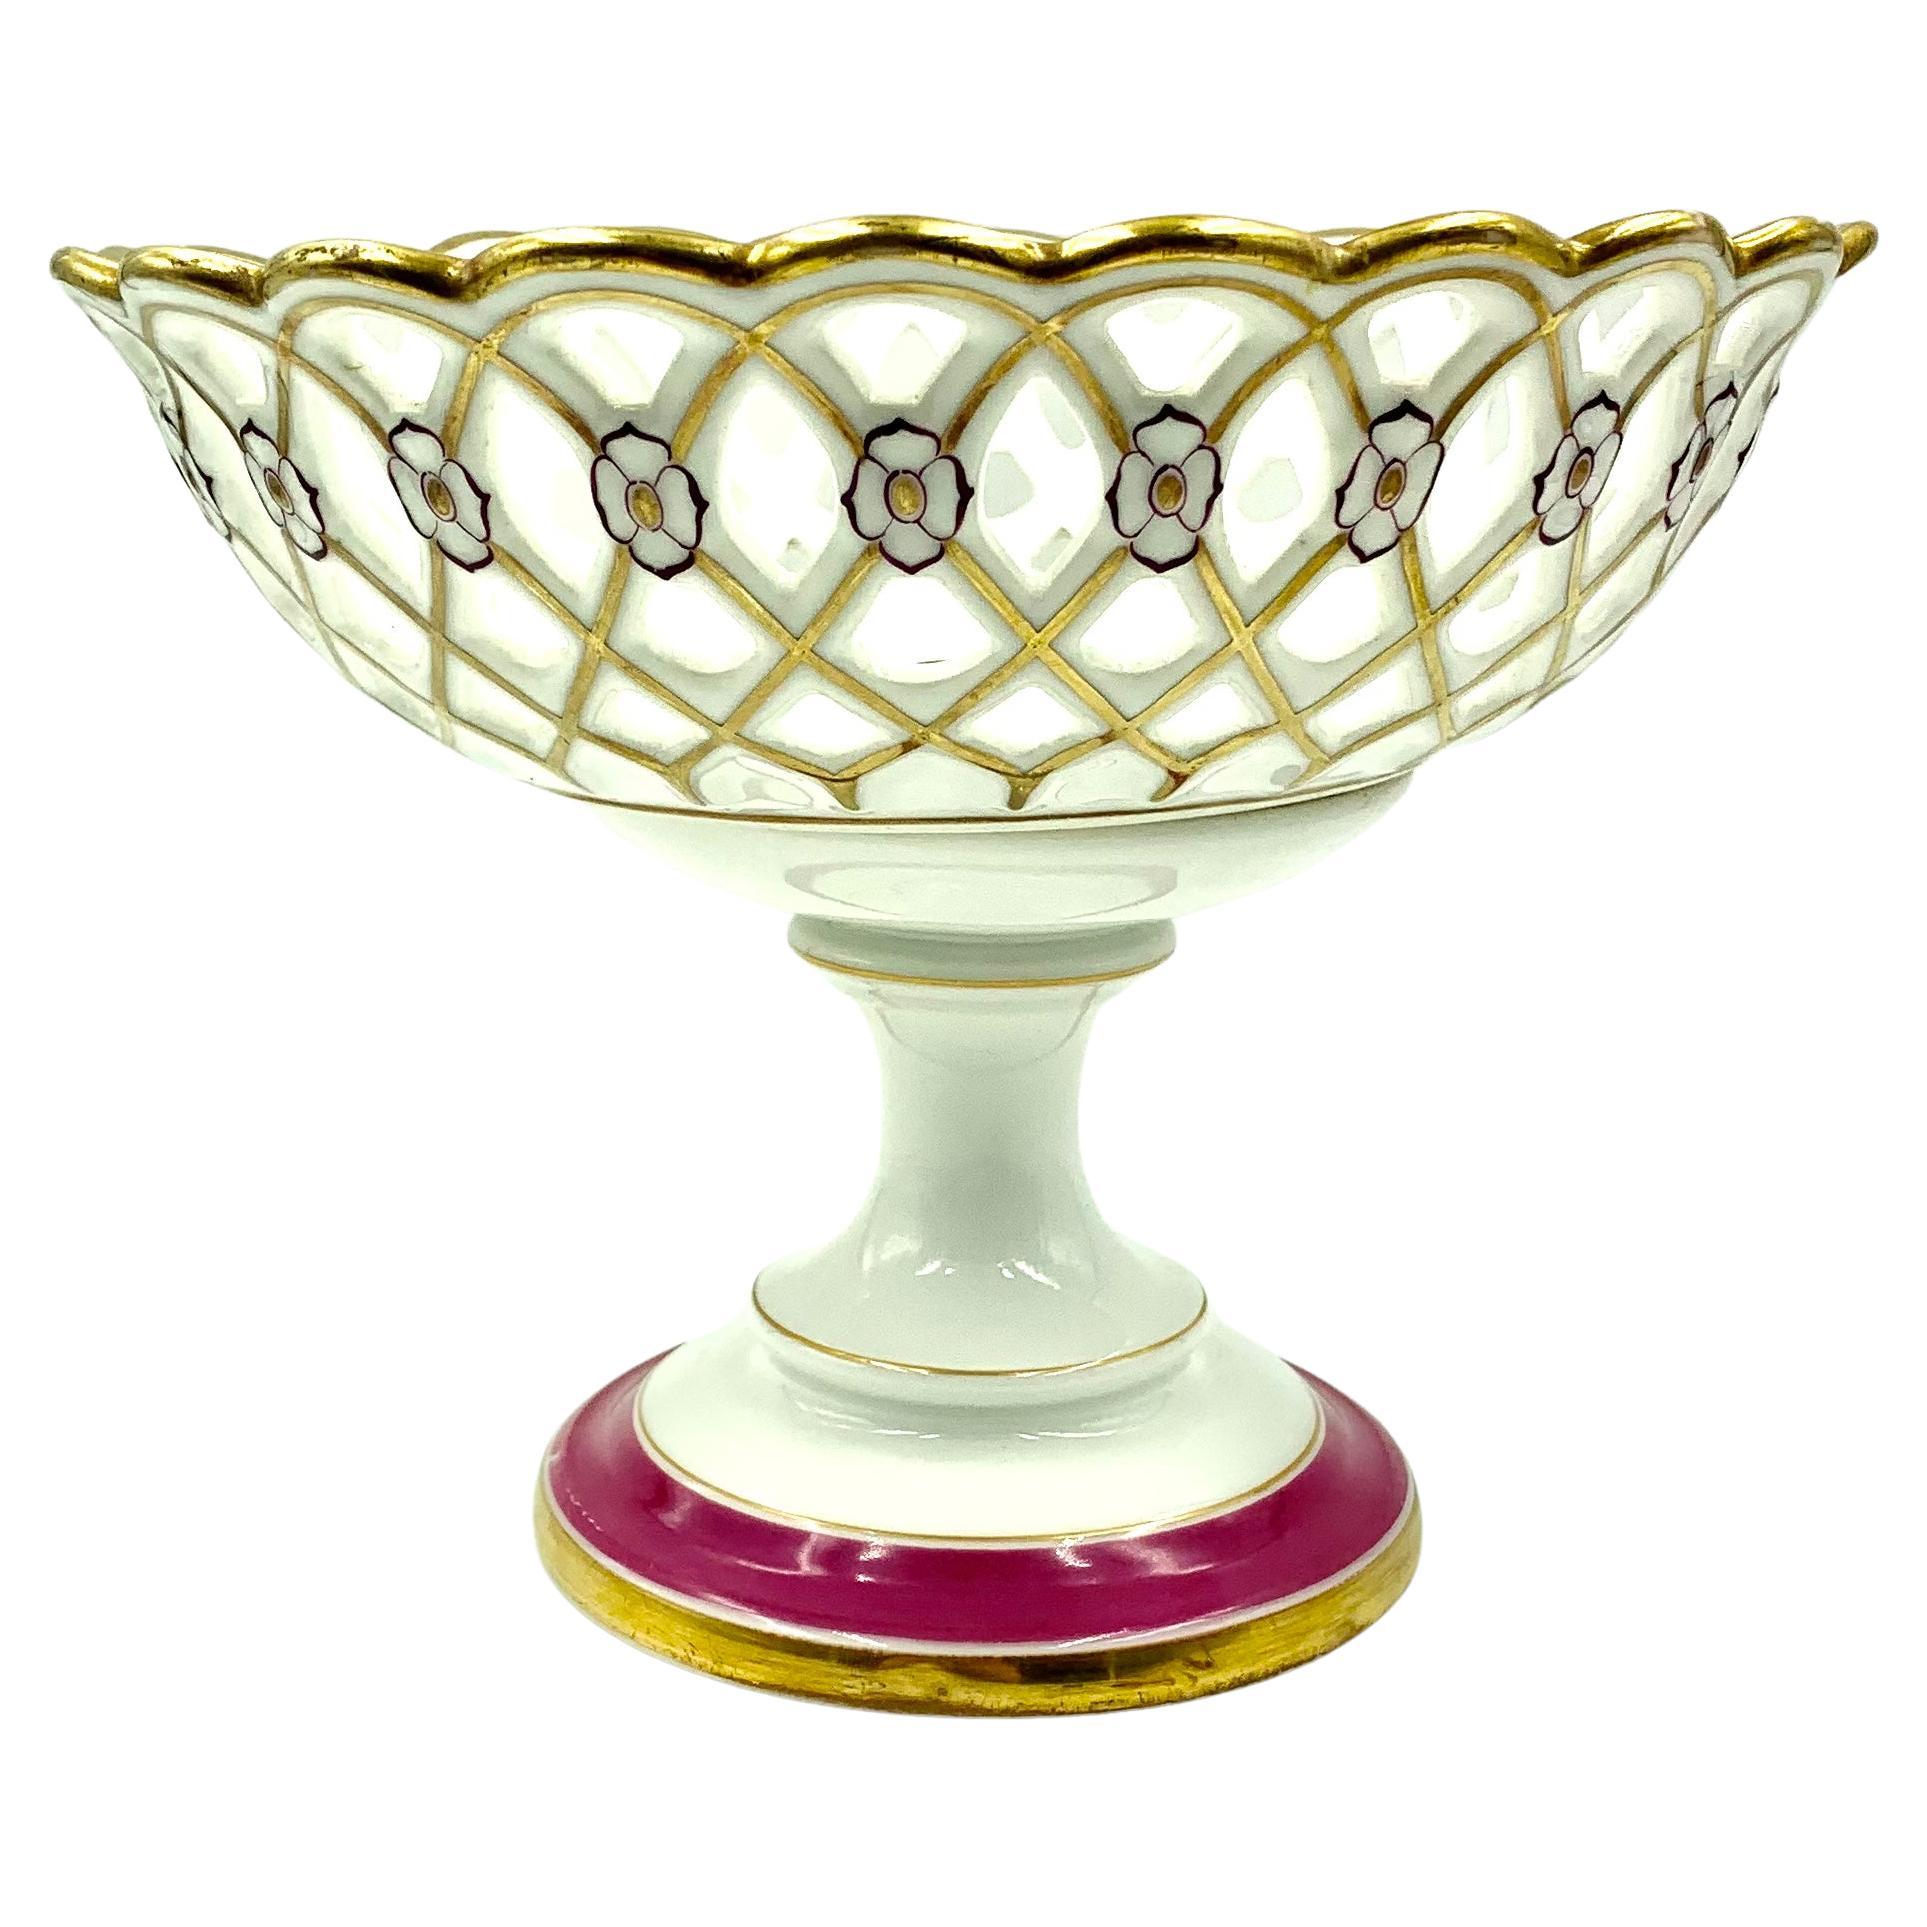 19th Century Paris Porcelain Reticulated Gold, Pink Neoclassical Centerpiece